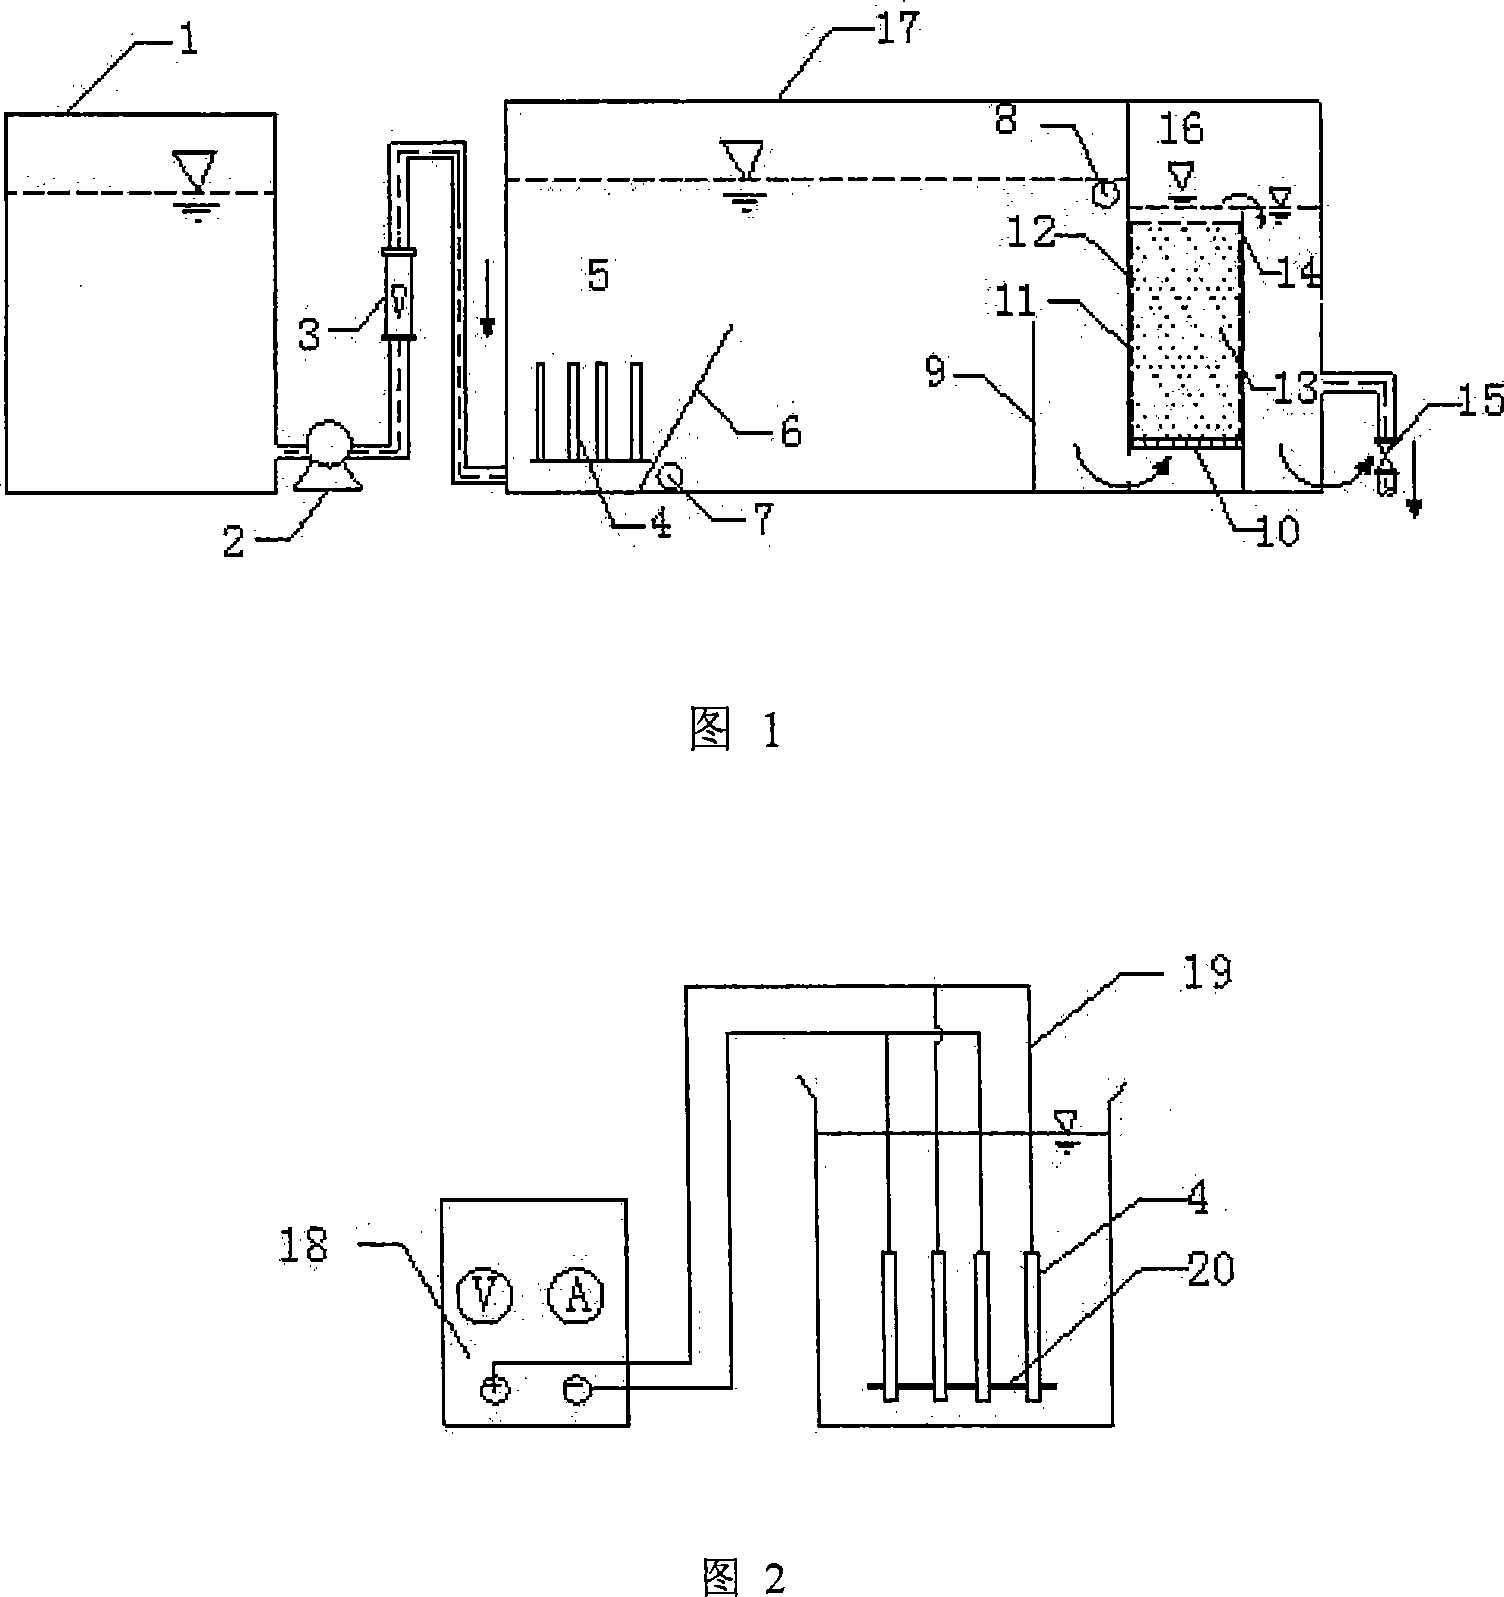 Device for treating oil field waste water